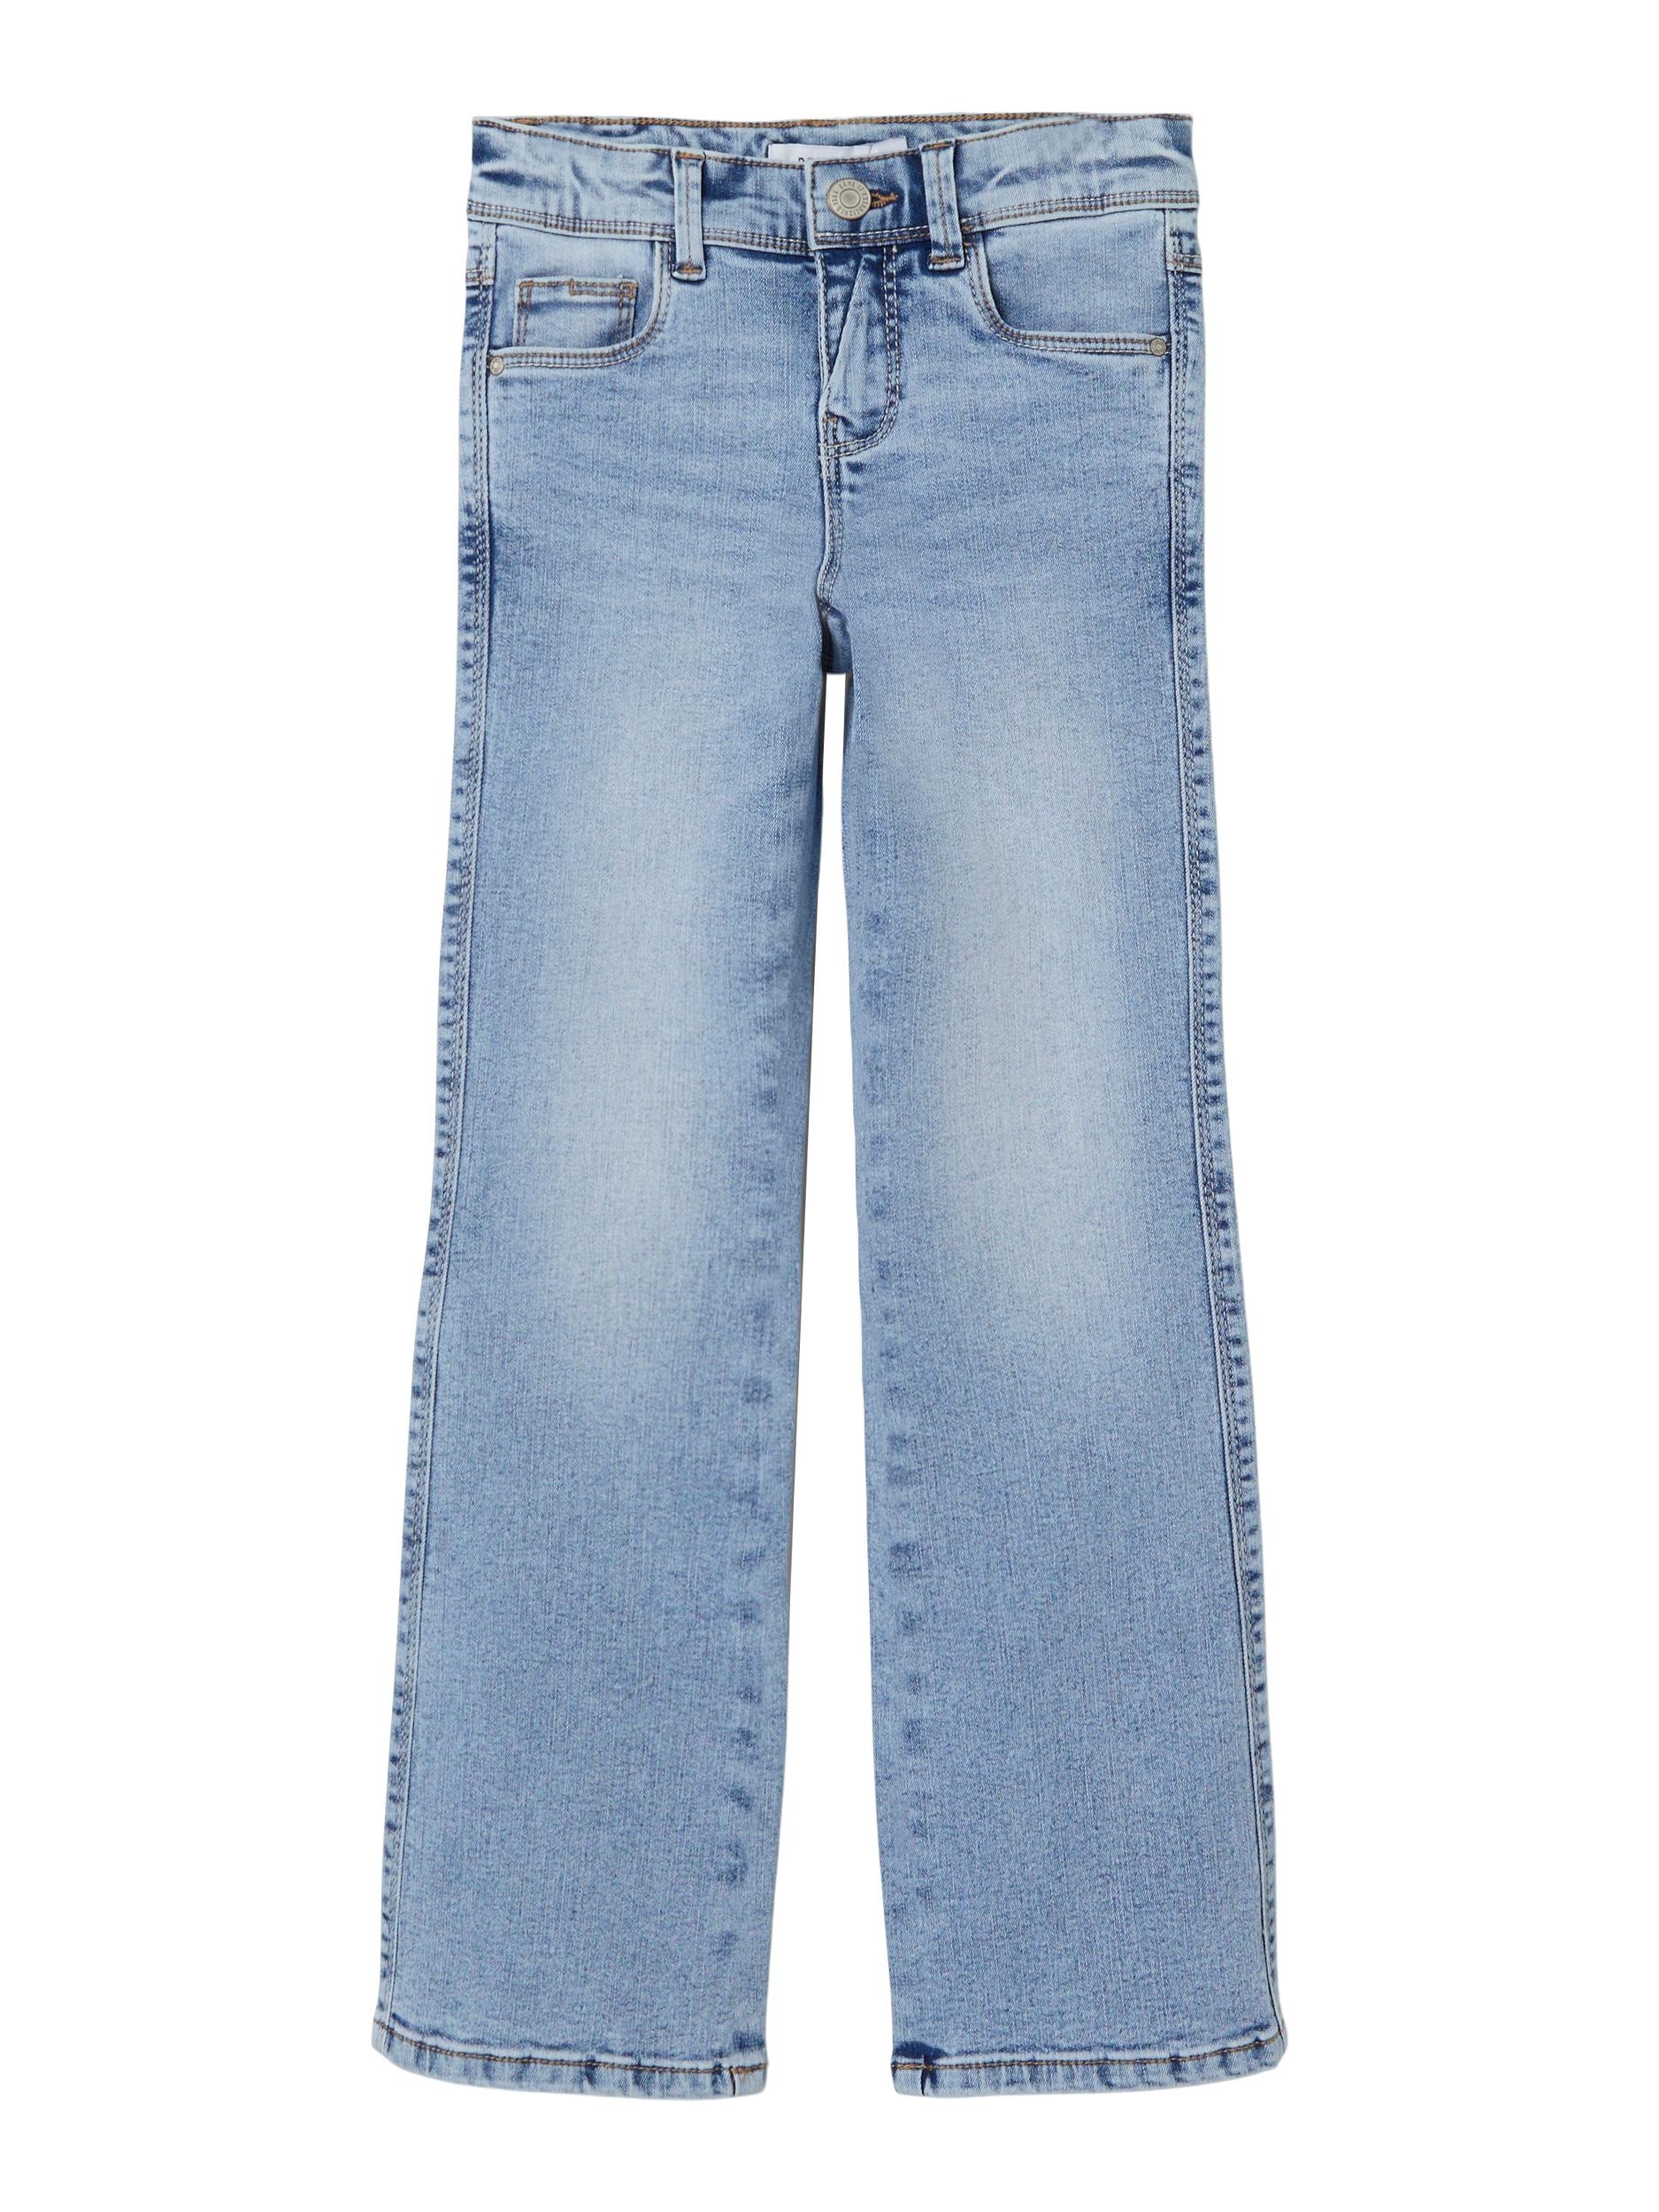 JEANS Stretch Bootcut-Jeans It bestellen »NKFPOLLY mit NOOS«, SKINNY 1142-AU Name BOOT